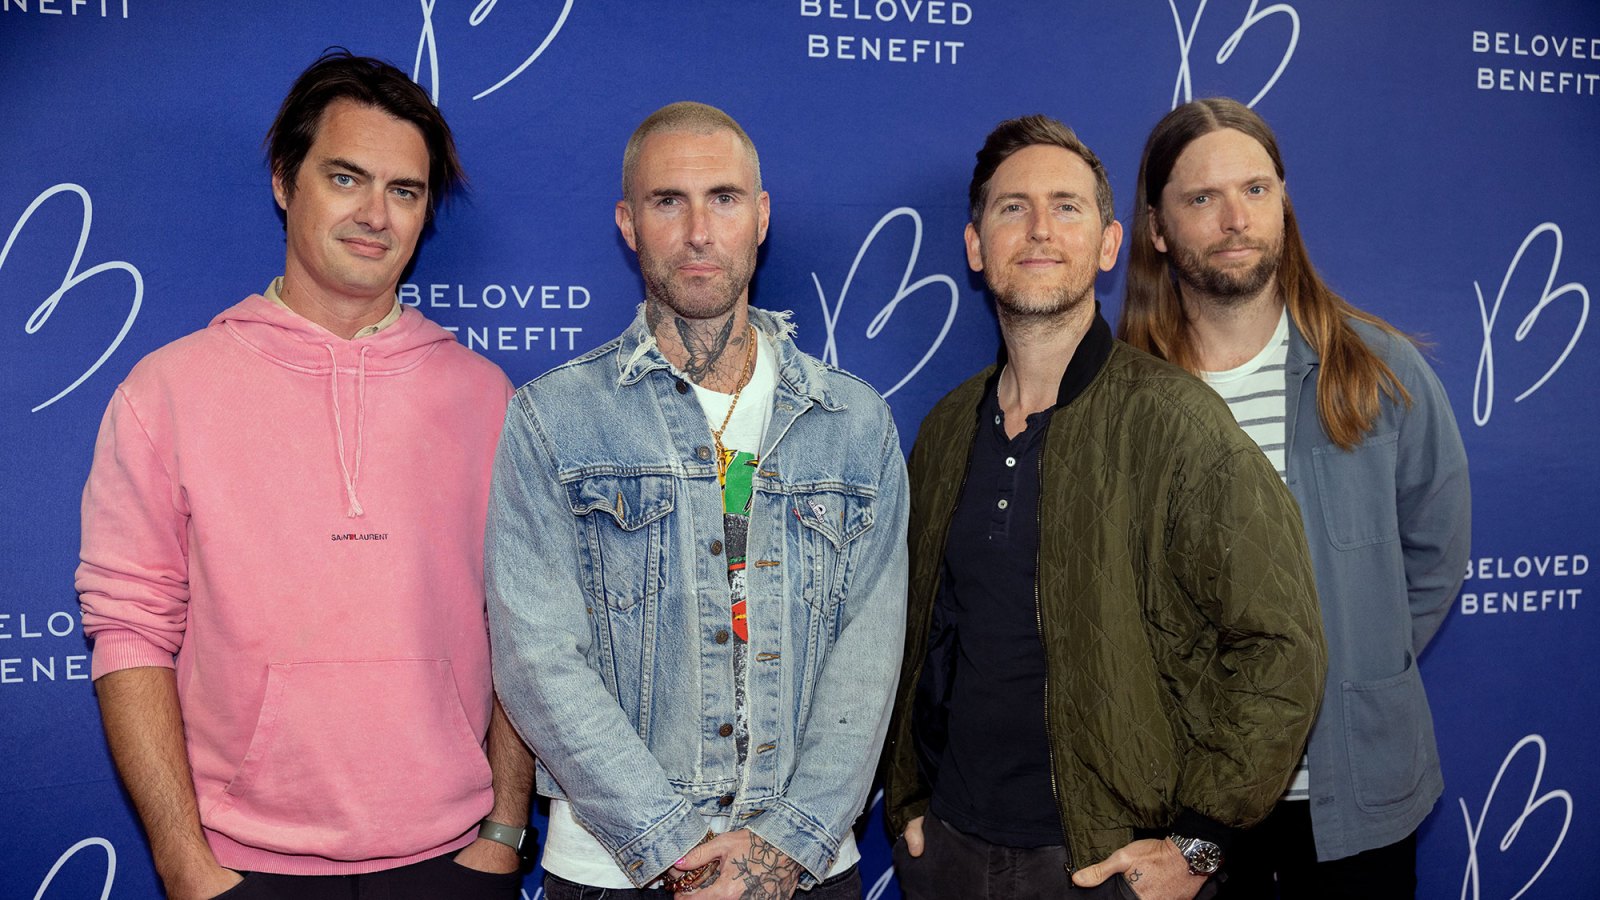 Adam Levine Schedules Las Vegas Residency With Maroon 5 Amid Cheating Scandal